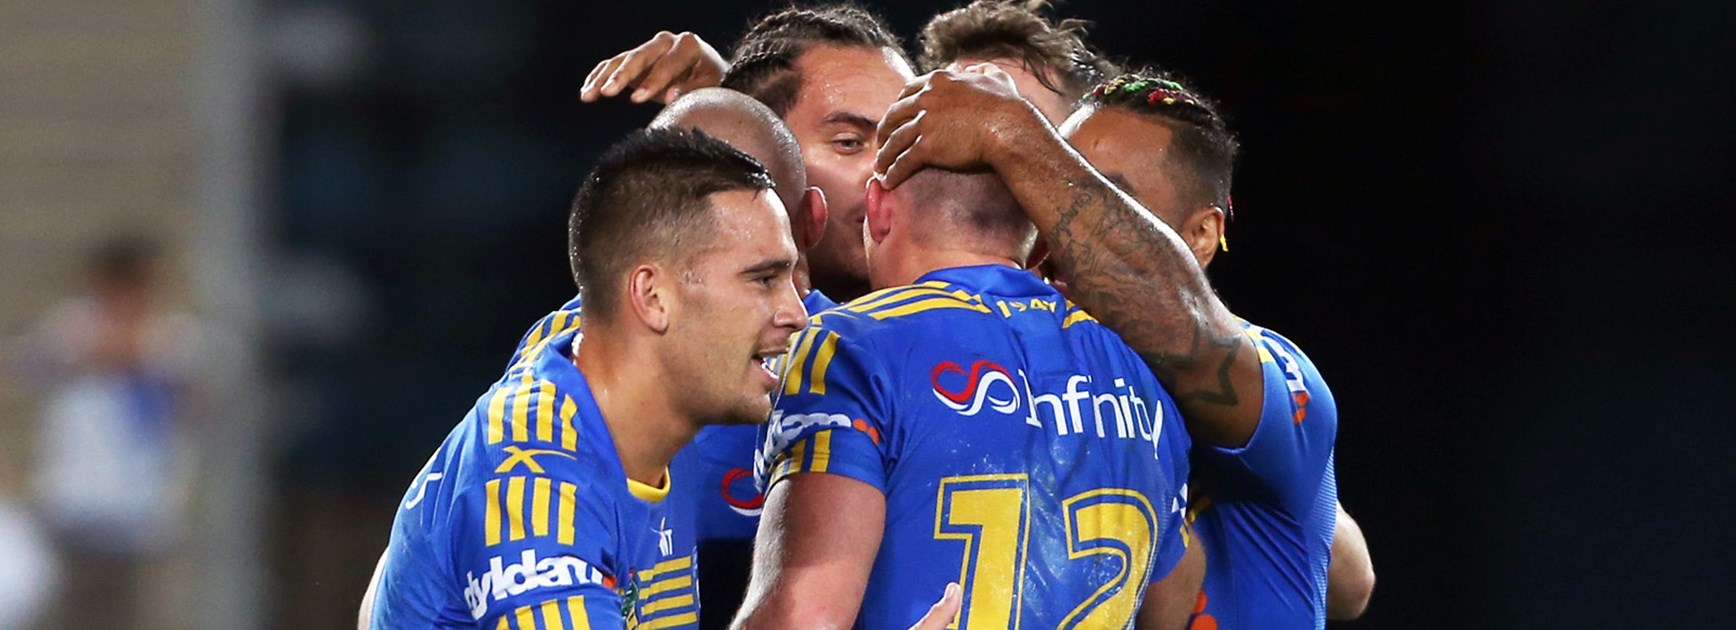 Eels players celebrate during their win over the Bulldogs in Round 9.